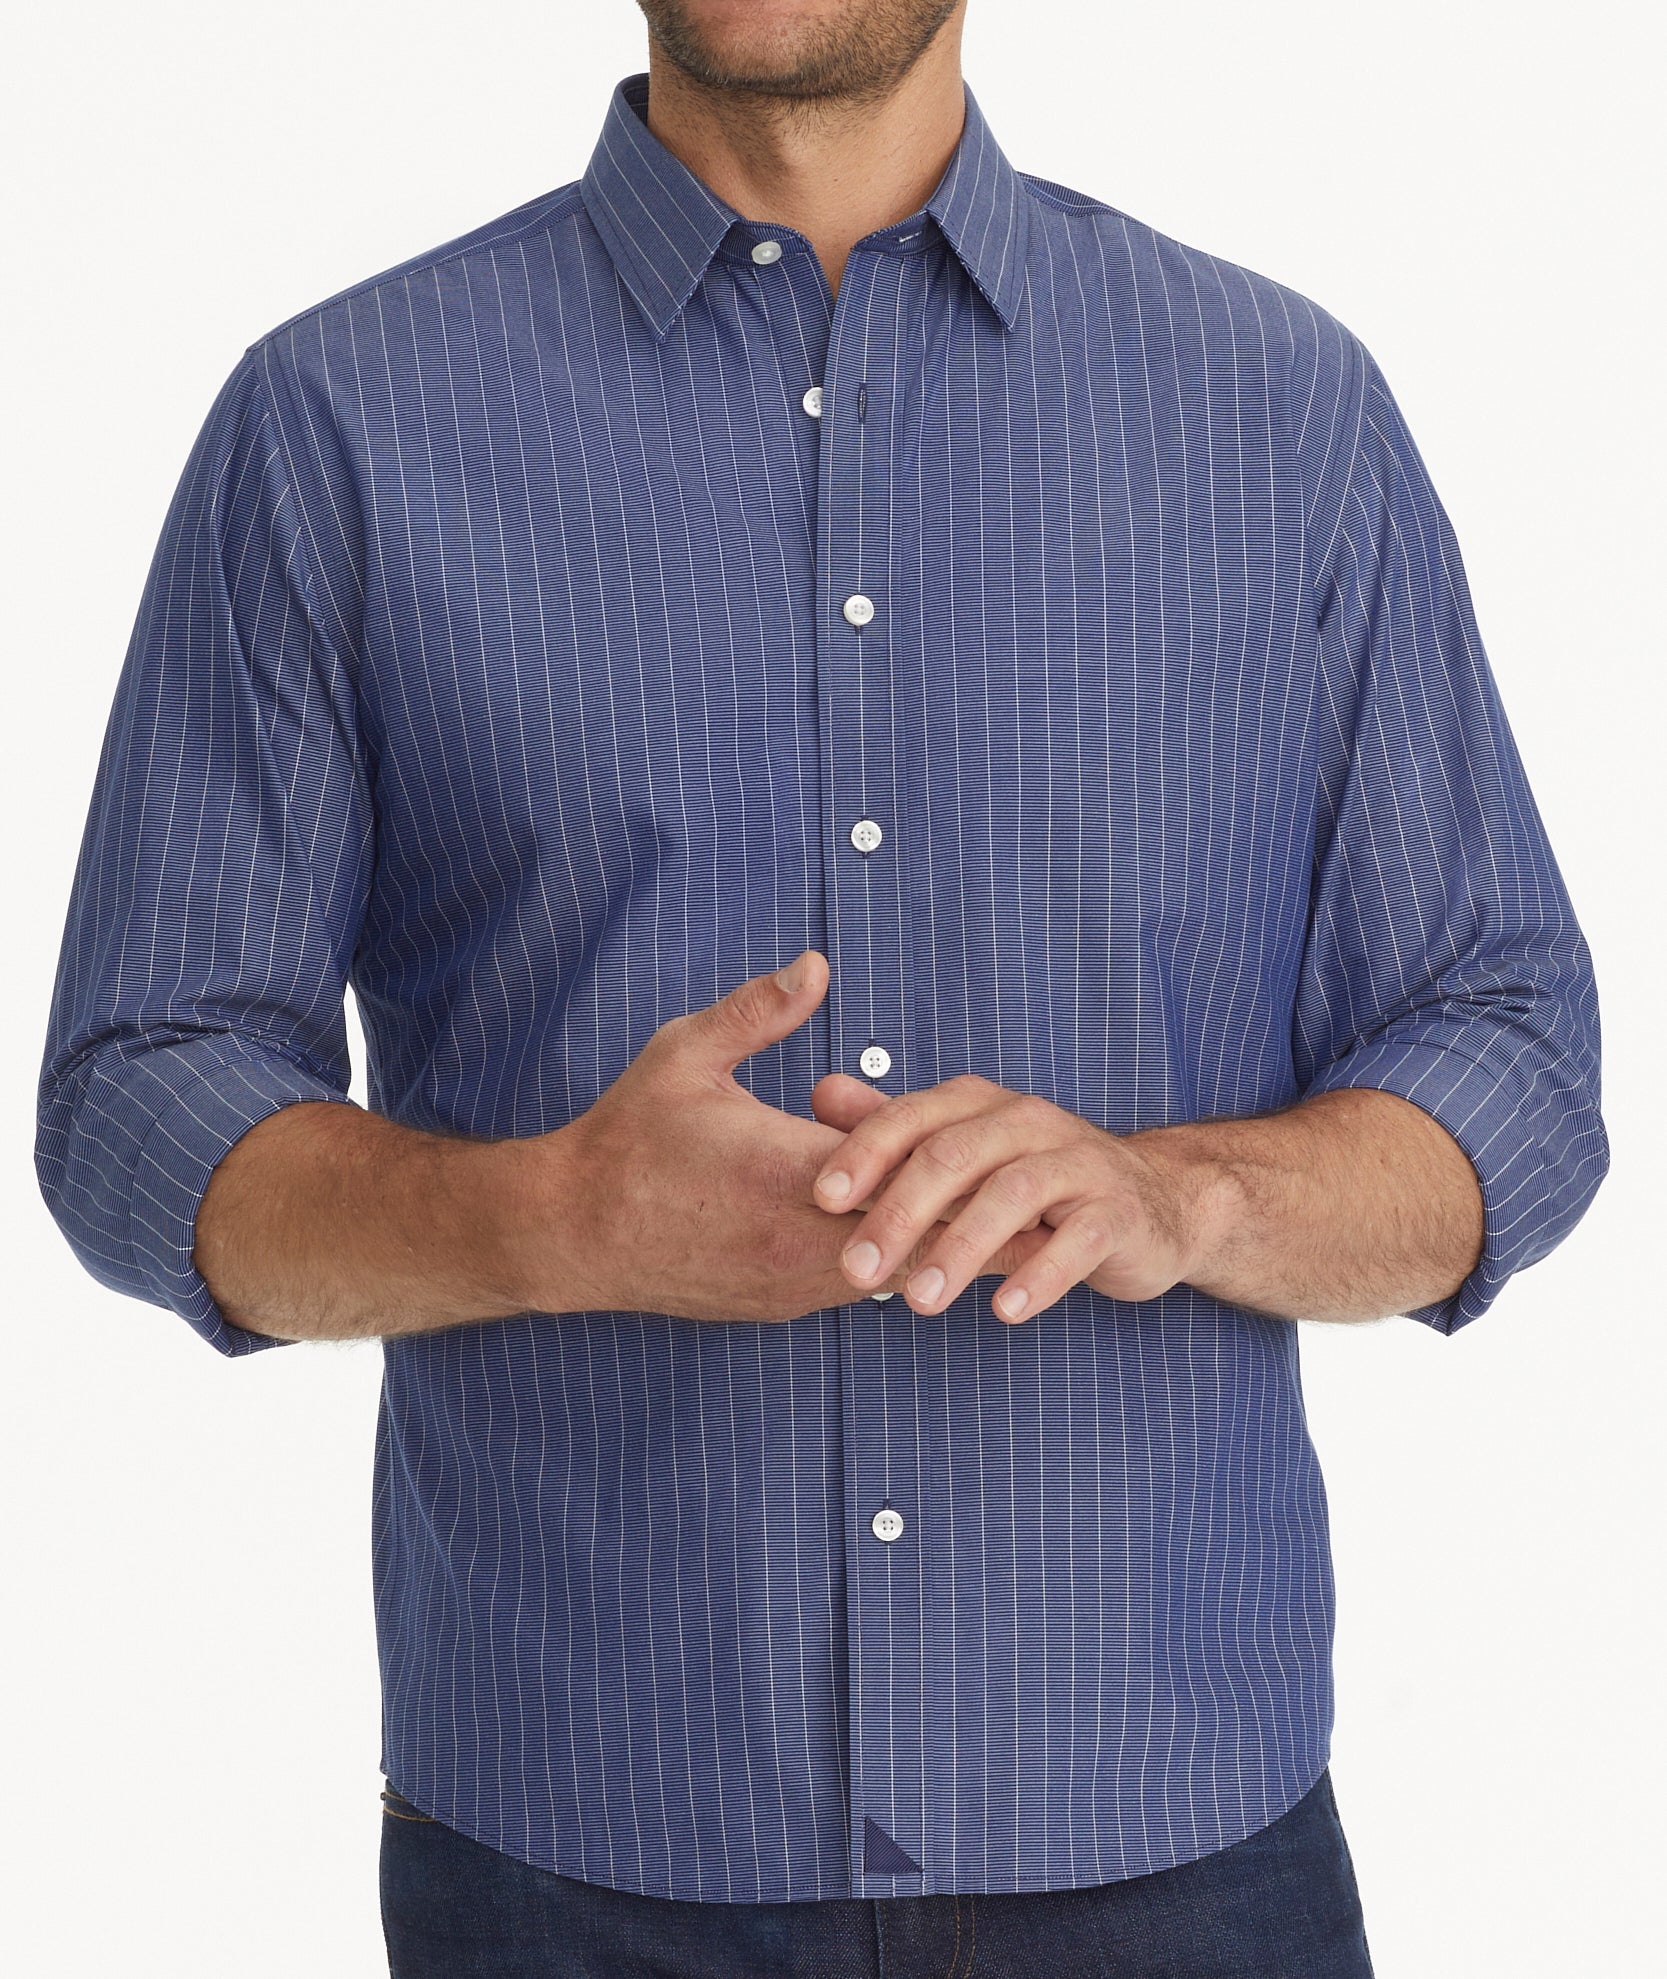 Gifford | White Blue Shirt Wrinkle-Free and UNTUCKit Stripe